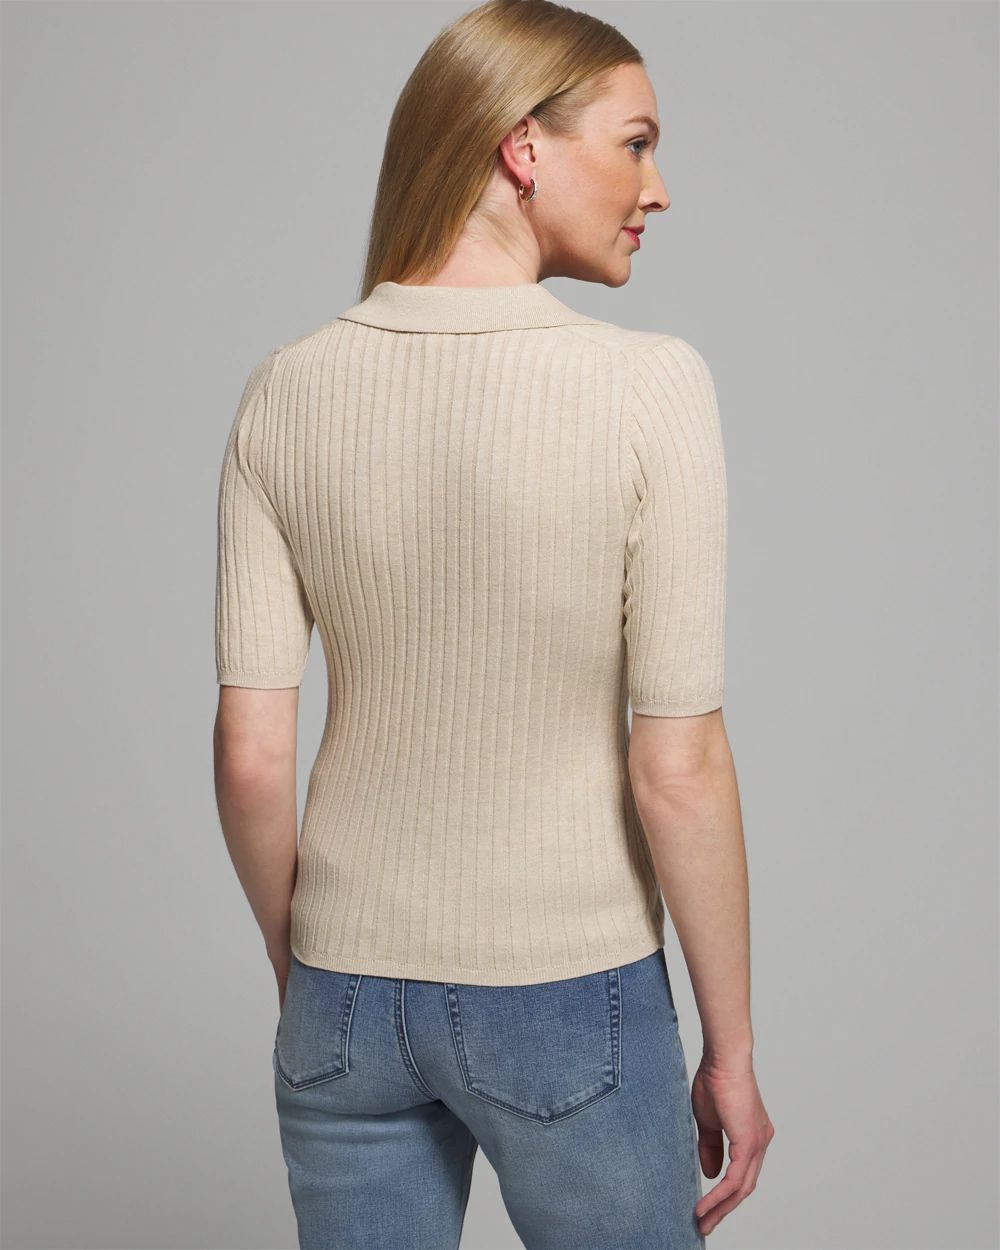 Outlet WHBM Button Front Collar Pullover click to view larger image.